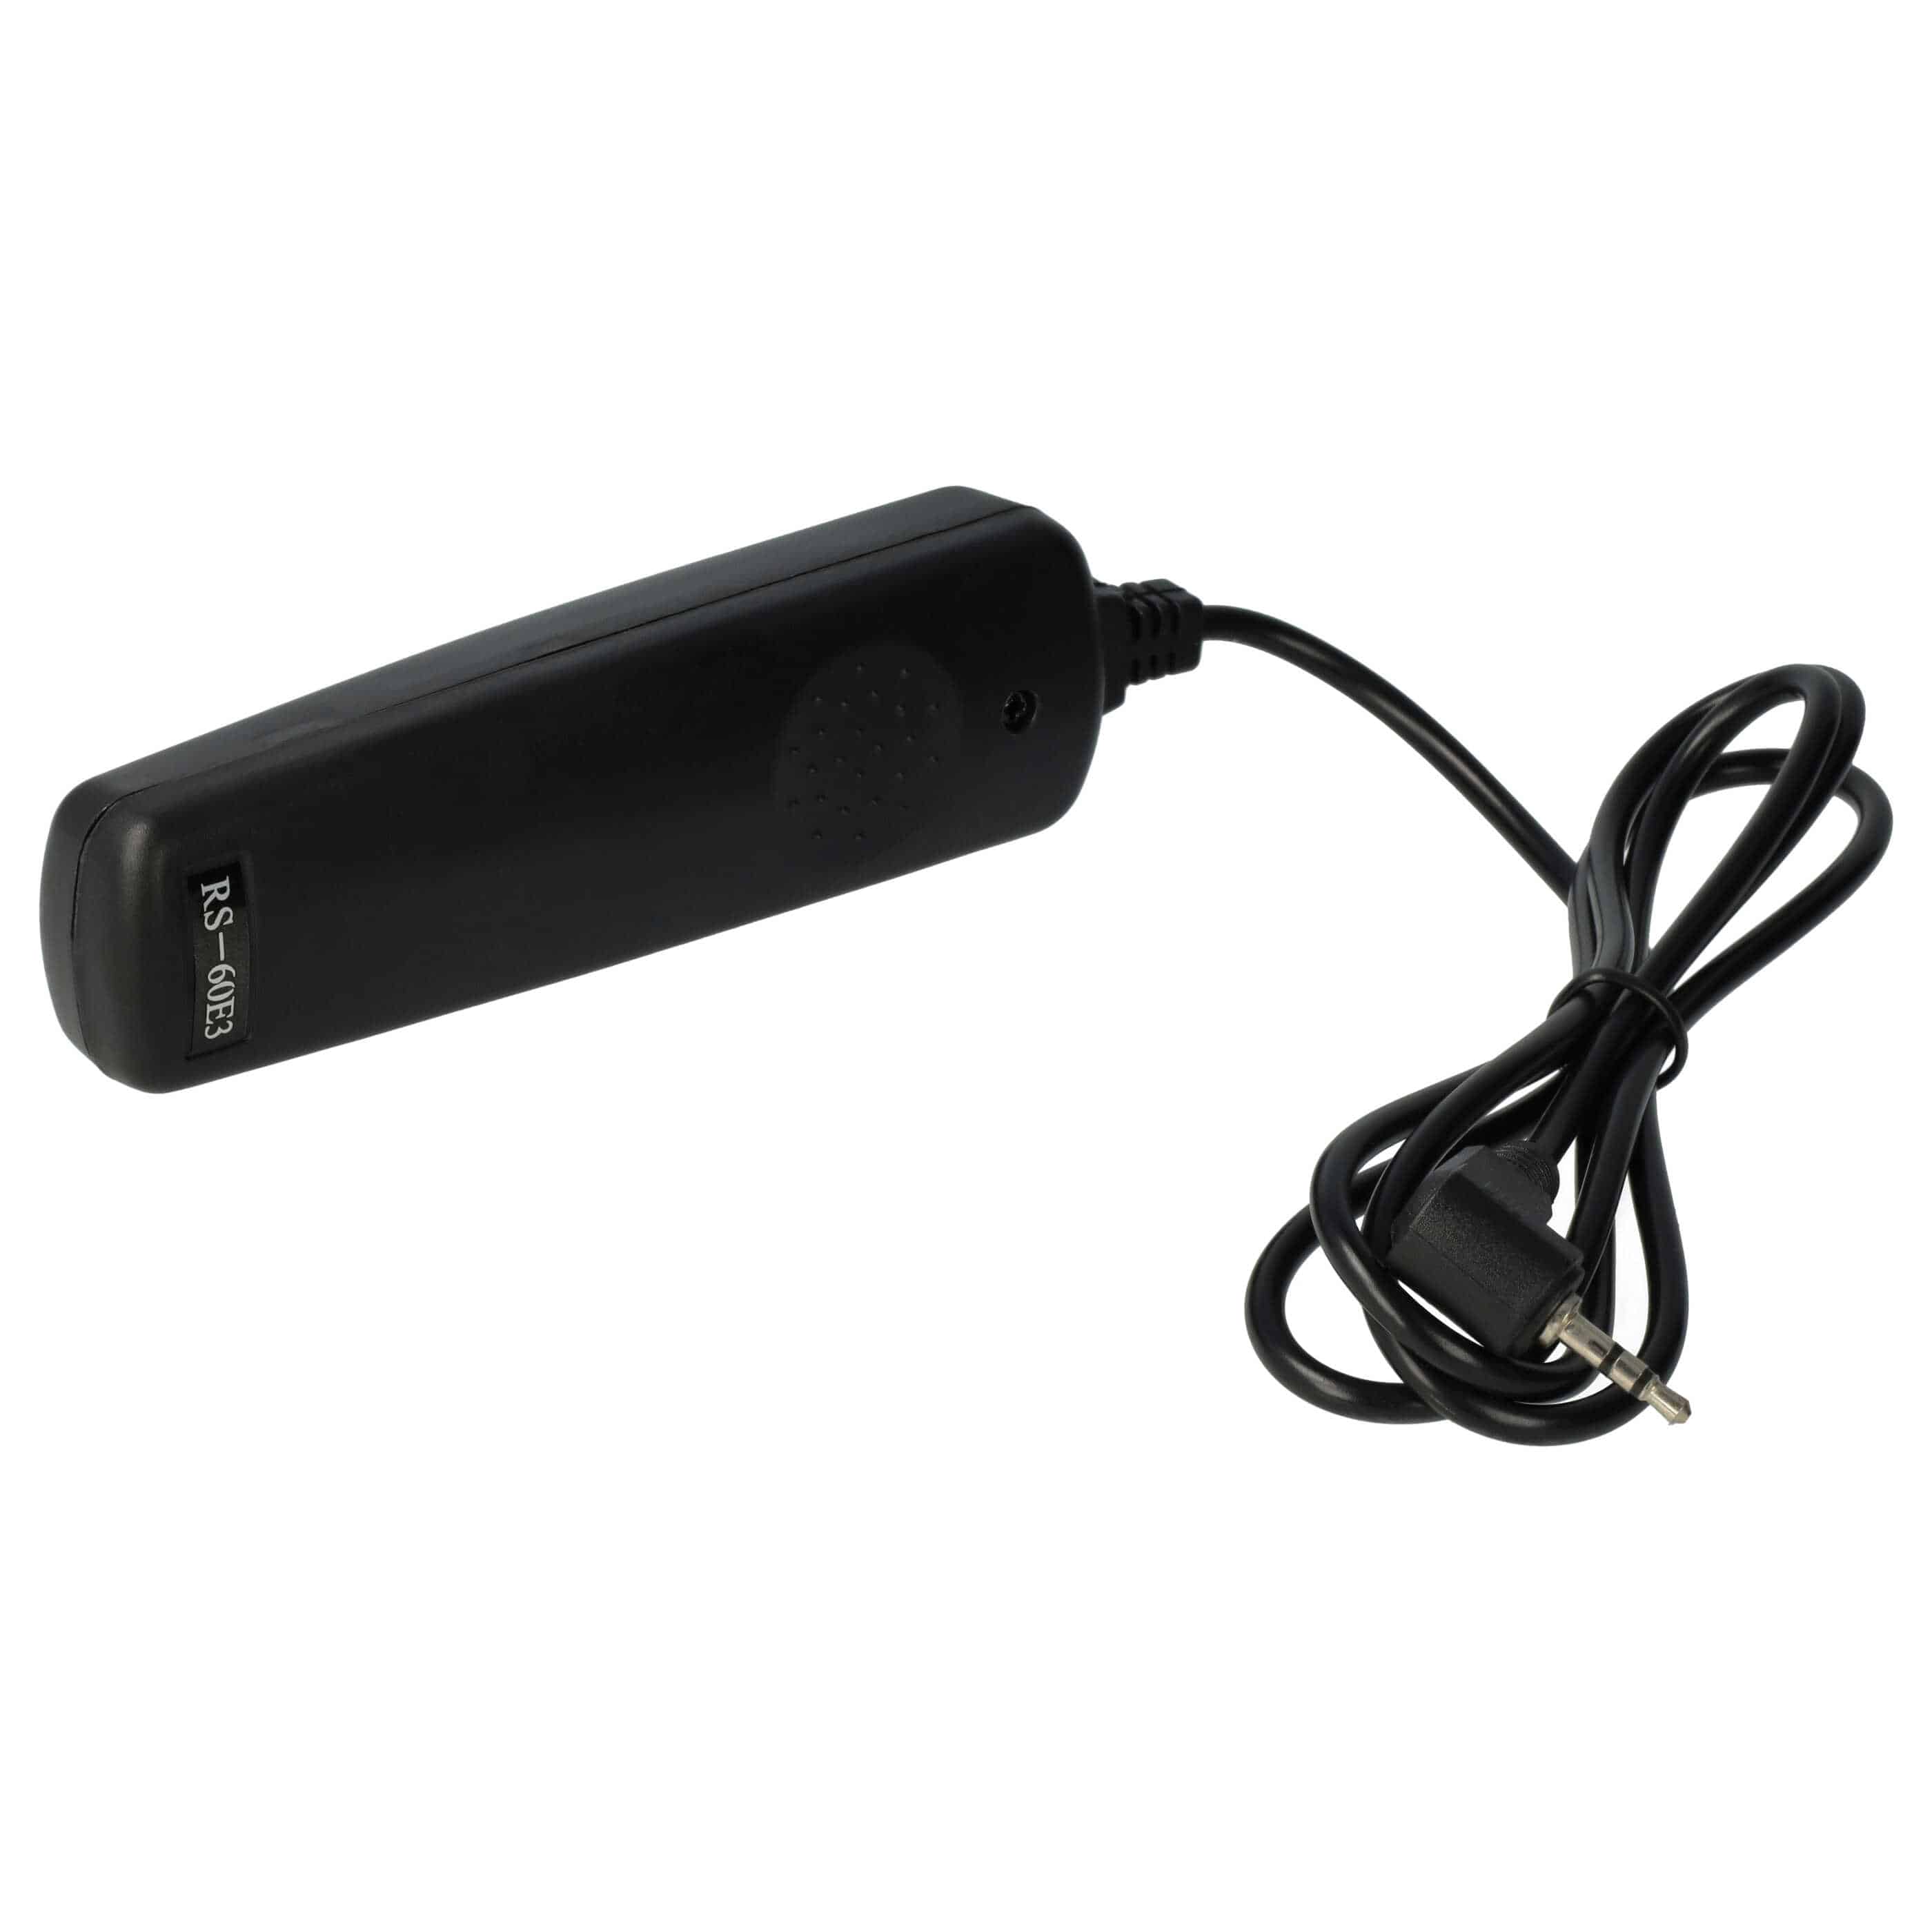 Remote Trigger as Exchange for Canon RS-60E3 for Camera etc. 2-Step Shutter, 1 m Lead